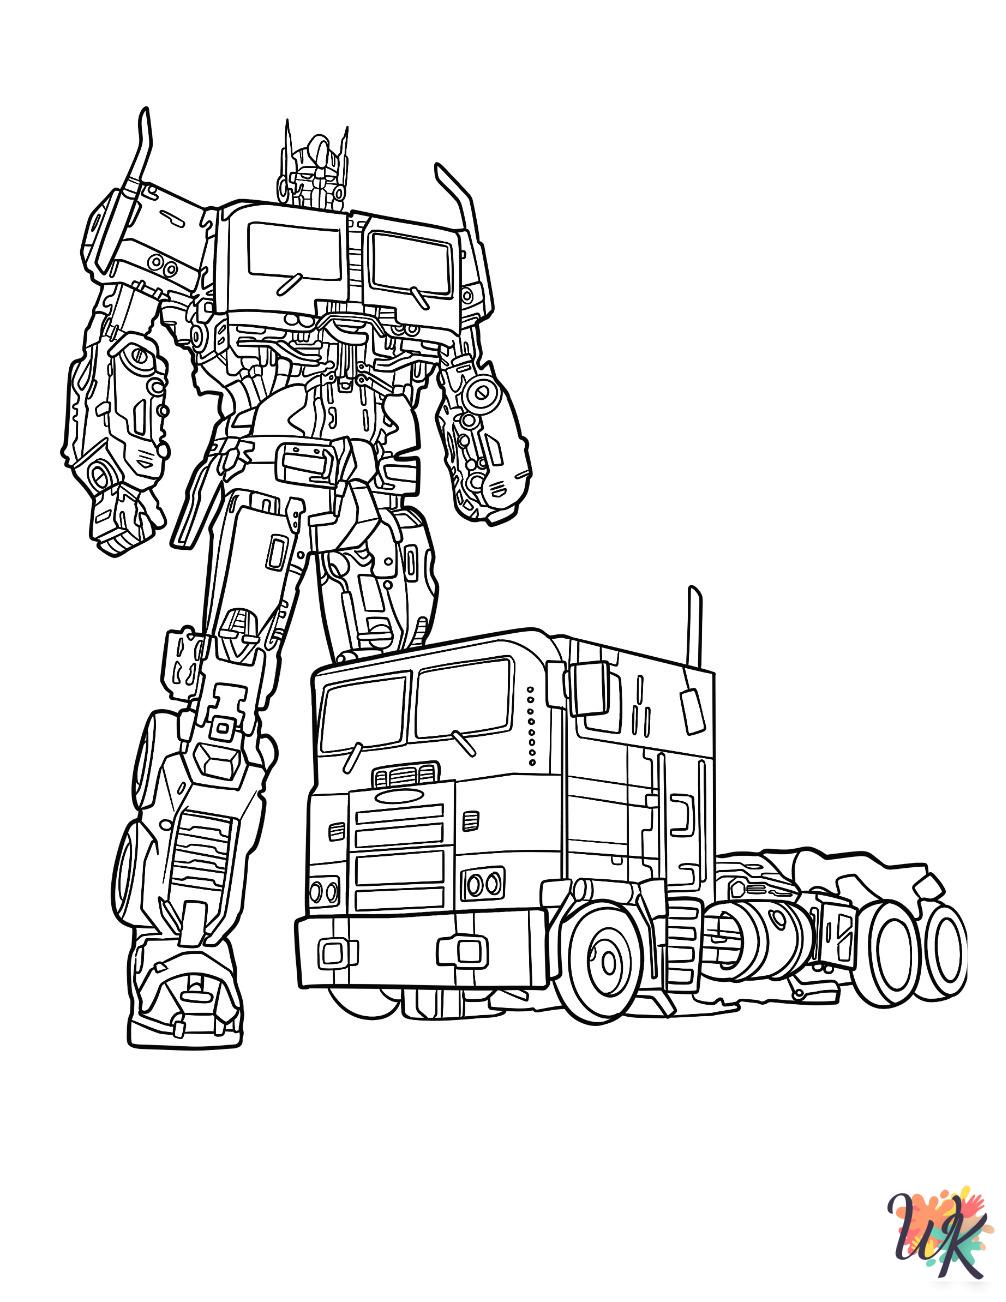 detailed Optimus Prime coloring pages for adults